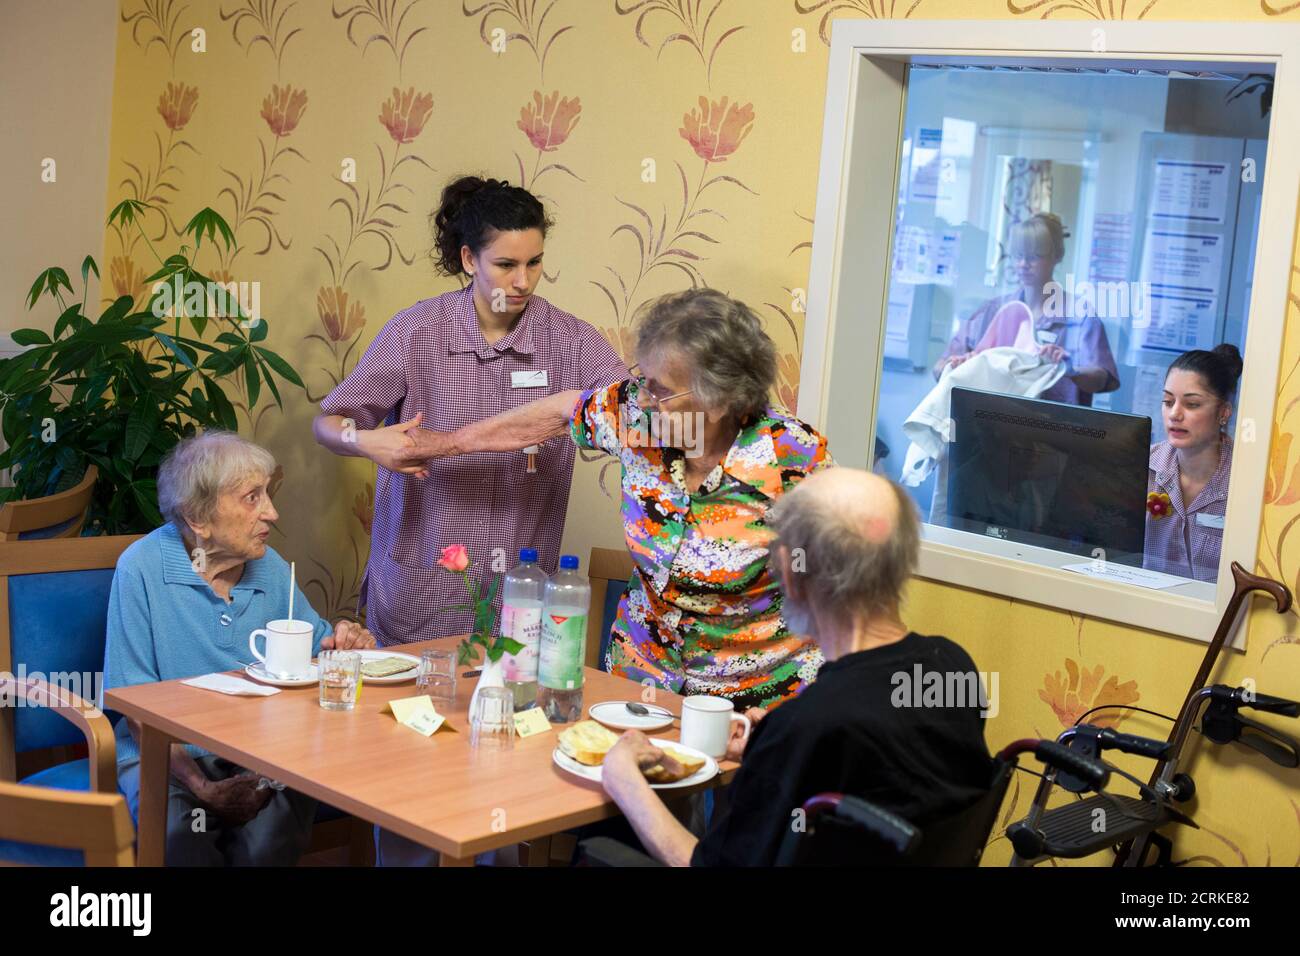 Alba Gil Quiros (2nd L) from the Spanish island of Tenerife assists a resident at the SenVital elderly home in Kleinmachnow outside Berlin May 28, 2013. Facing an acute shortage of skilled applicants among its own workforce, German institutions in the care sector increasingly turn to southern European countries to hire trained nursing staff who are willing to work abroad despite the language barrier in order to escape unemployment at home. The SenVital home for the elderly outside Berlin has accepted five qualified nurses from Spain as their staff, providing eight months of language training a Stock Photo